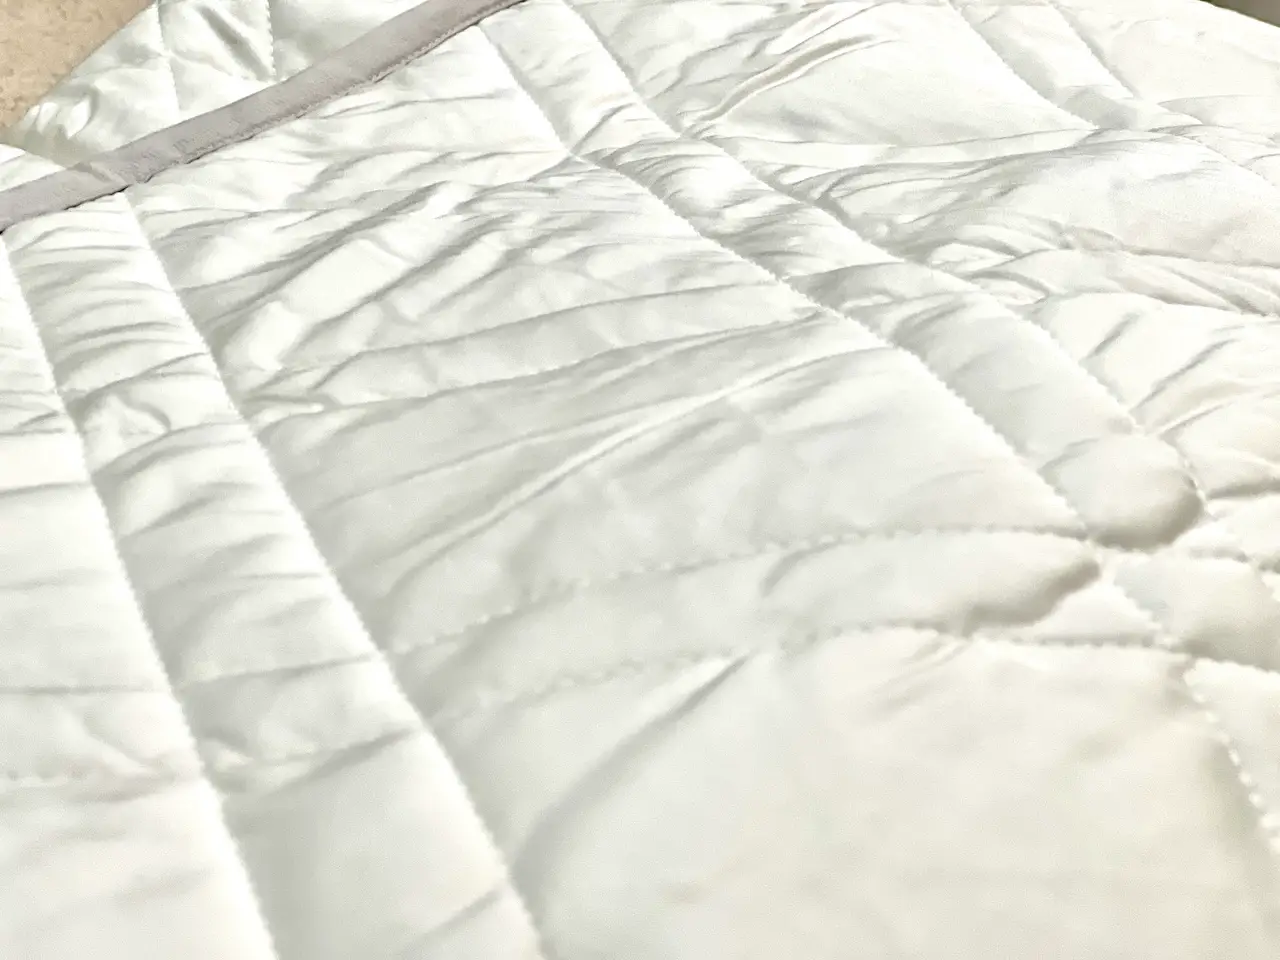 Aricove weighted blanket review